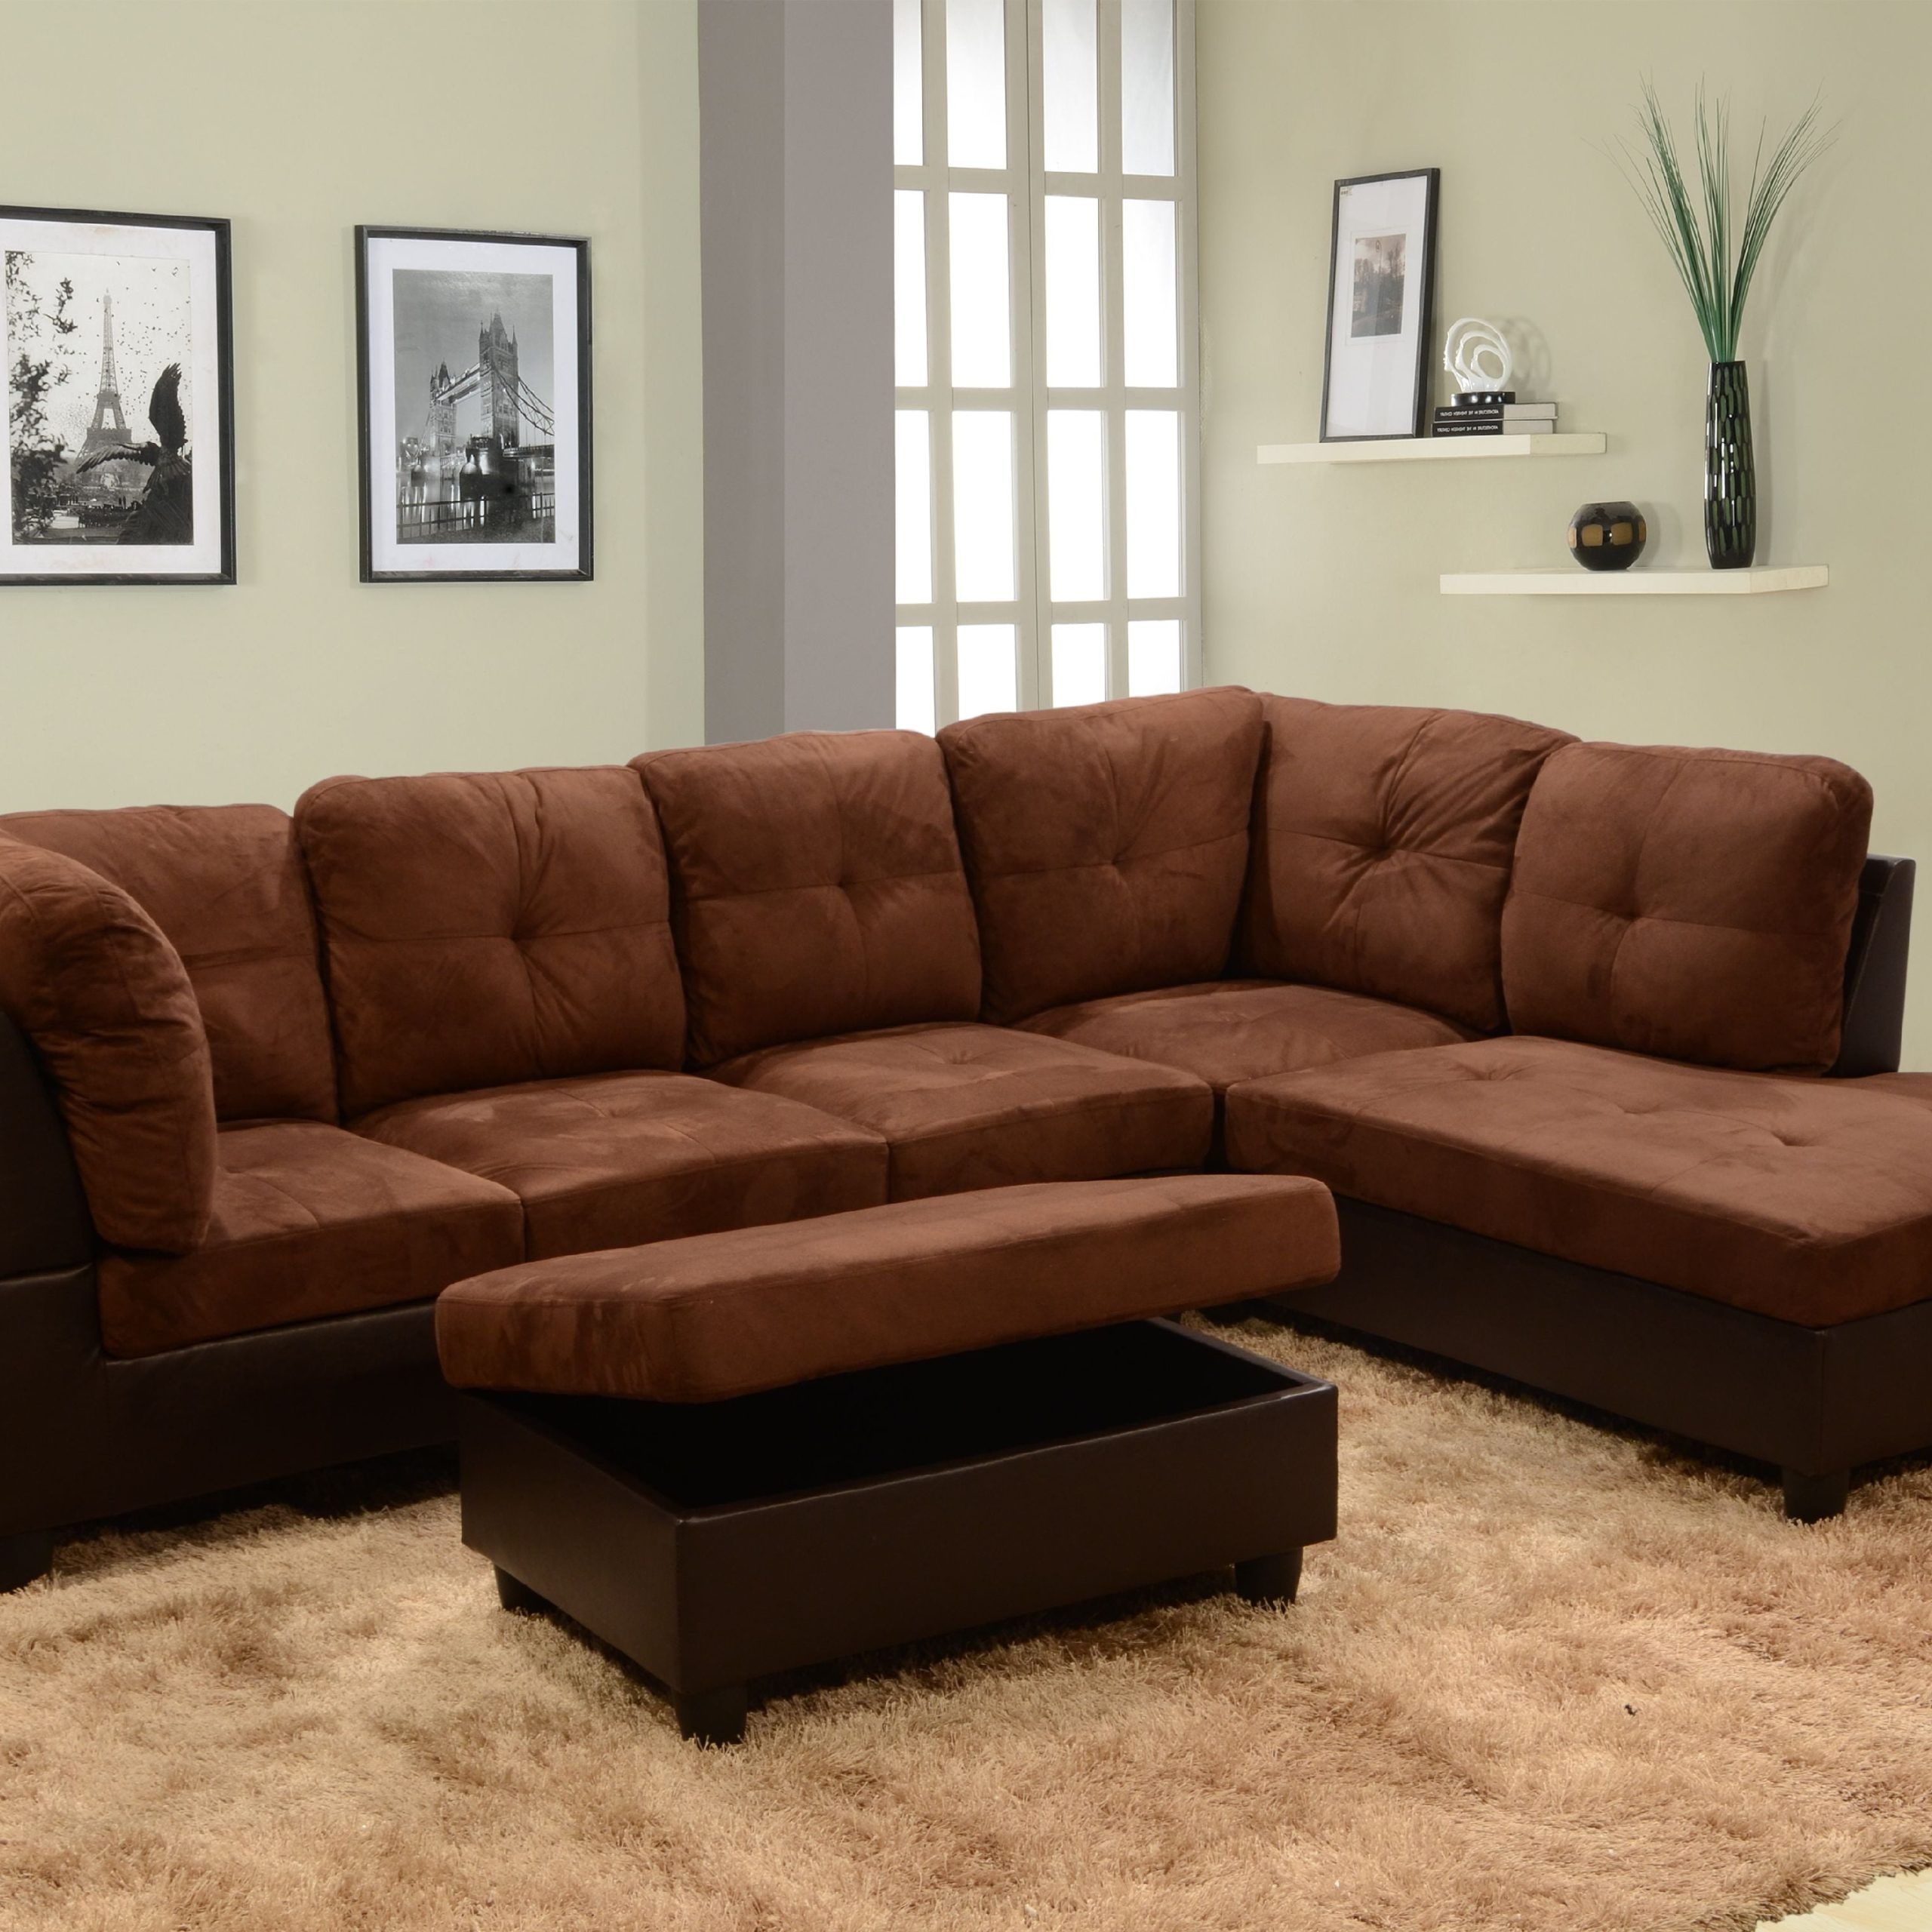 Matt Right Facing Sectional Sofa With Ottoman,chocolate – Walmart Regarding Sofas In Chocolate Brown (Gallery 7 of 20)